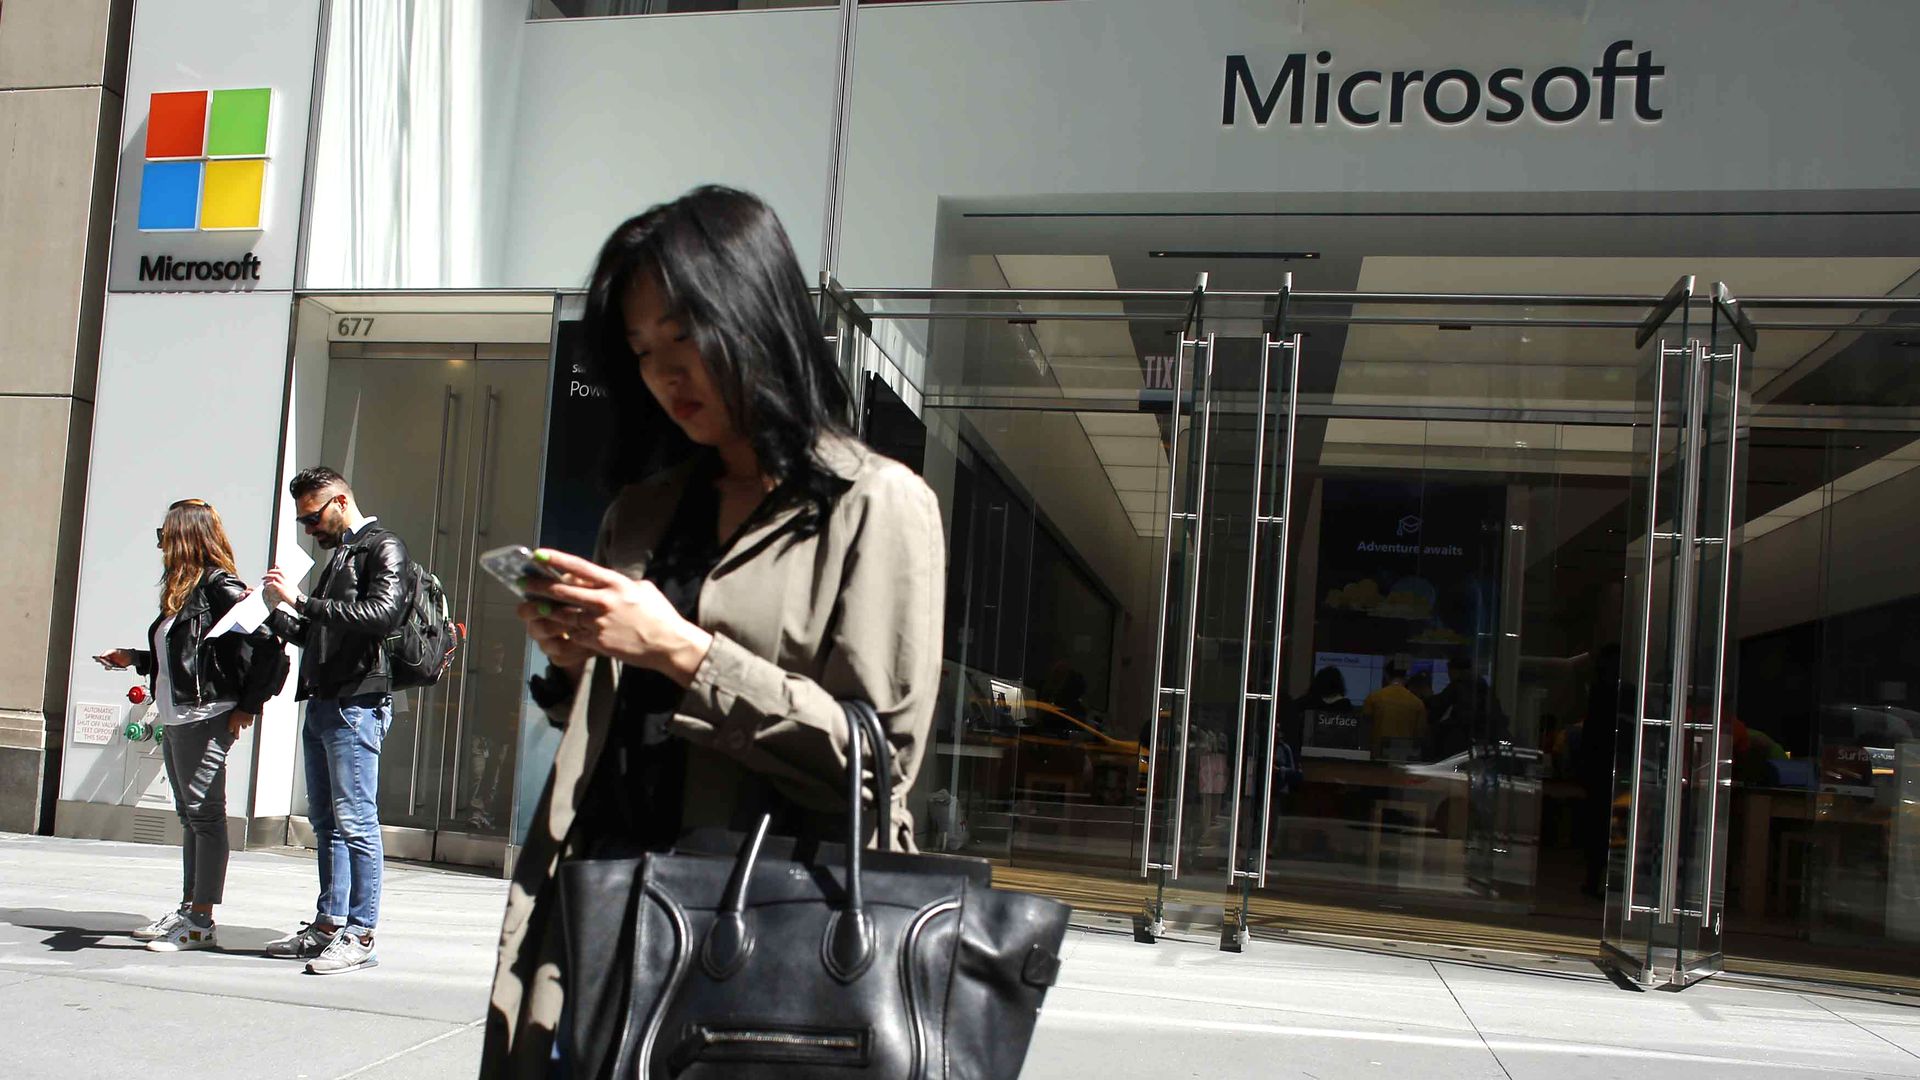 A photo of a woman on her phone outside a Microsoft office